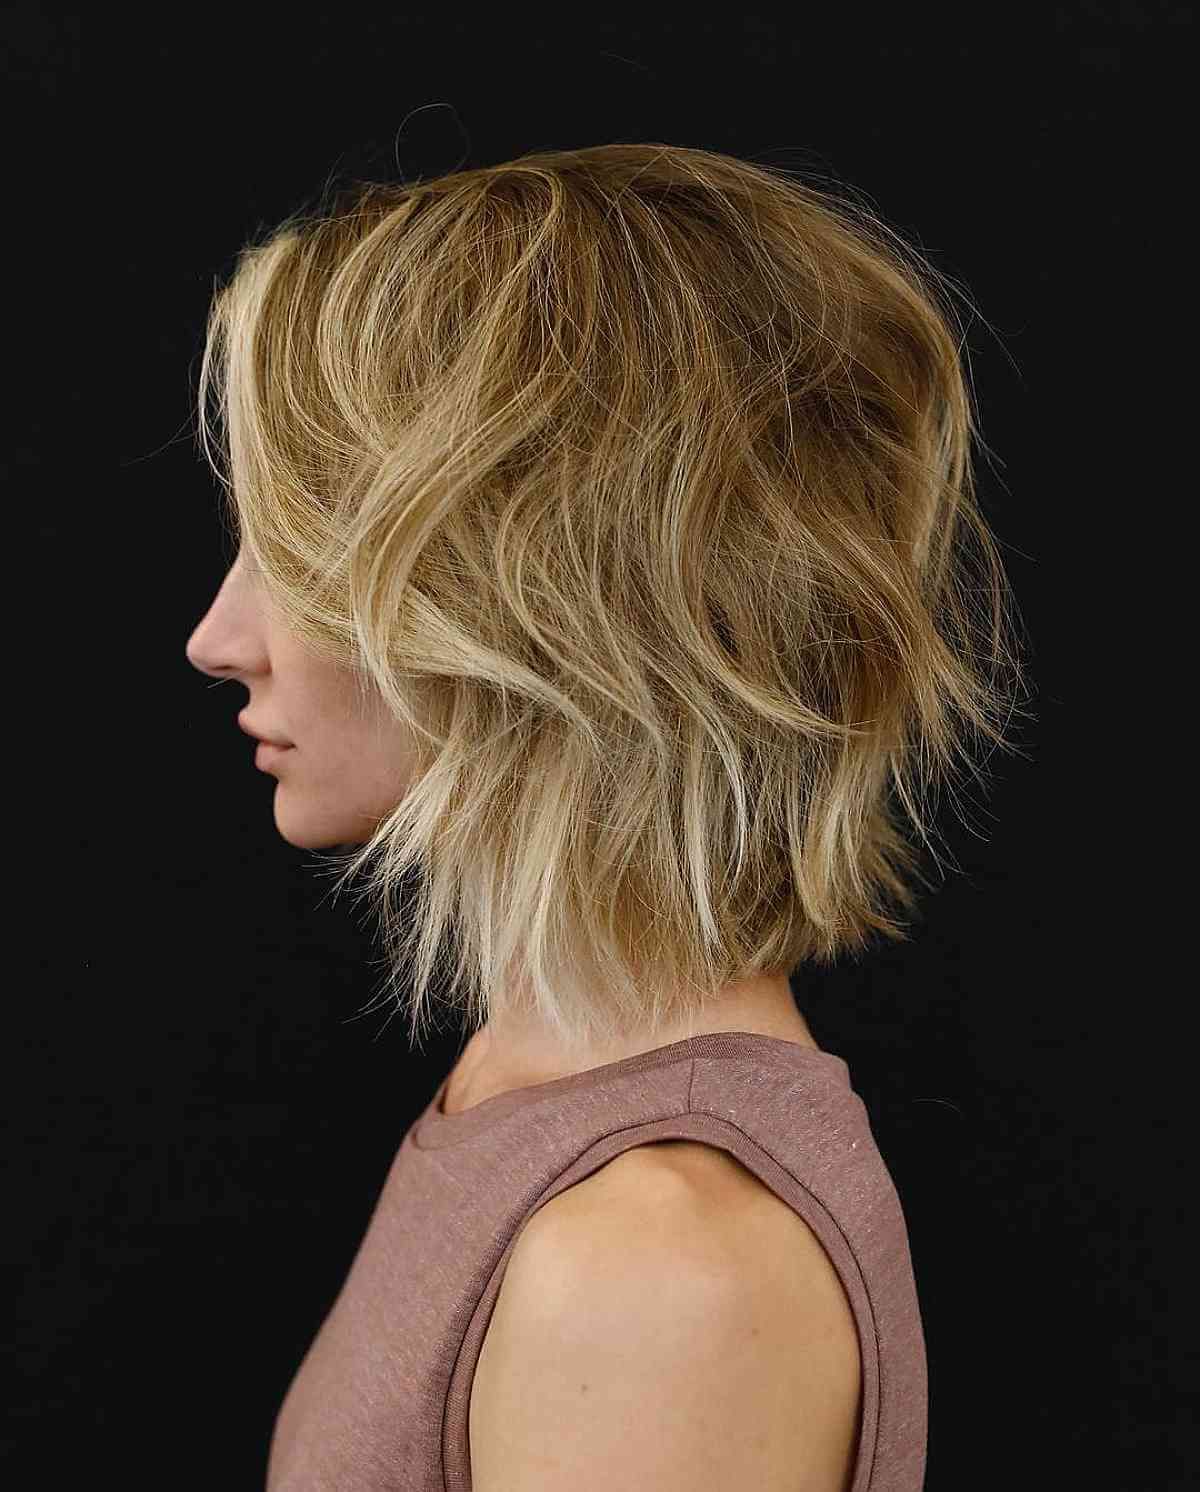 46 Messy Bob Haircut Ideas For The Ultimate Boho Vibe Intended For 2019 Bed Head Blunt Bob (Gallery 10 of 20)